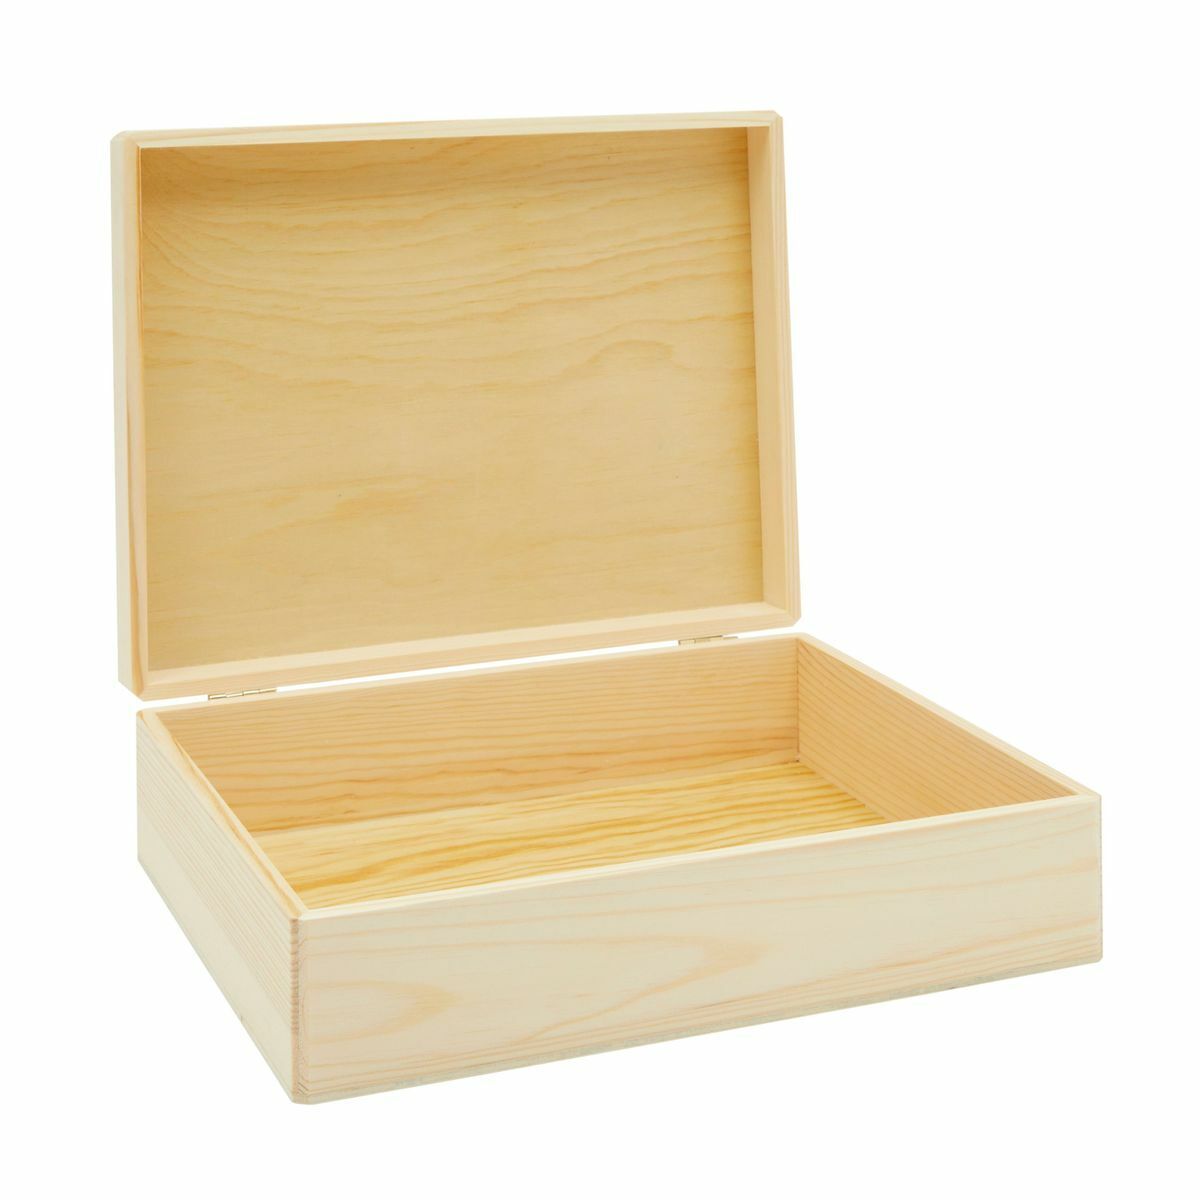 Unfinished Wooden Box with Hinged Lid for Jewelry & Crafts Storage, 9x12x3.3 In